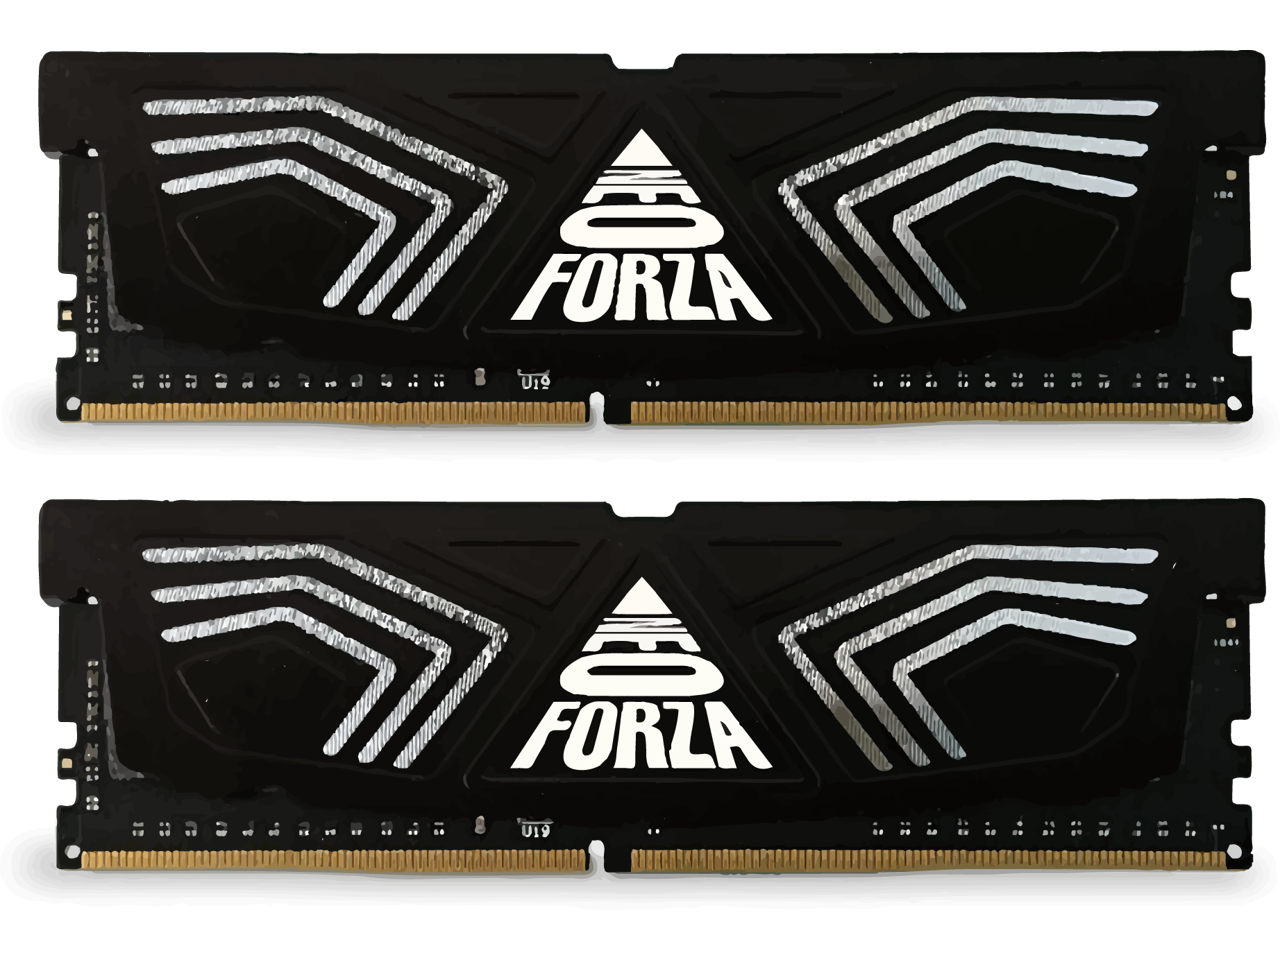 Neo Forza FAYE 32GB (2x16GB) 288-Pin DDR4 3200 (PC4 25600) Timing 16-18-18-36 RAM for $114.99 w/ FS after Code